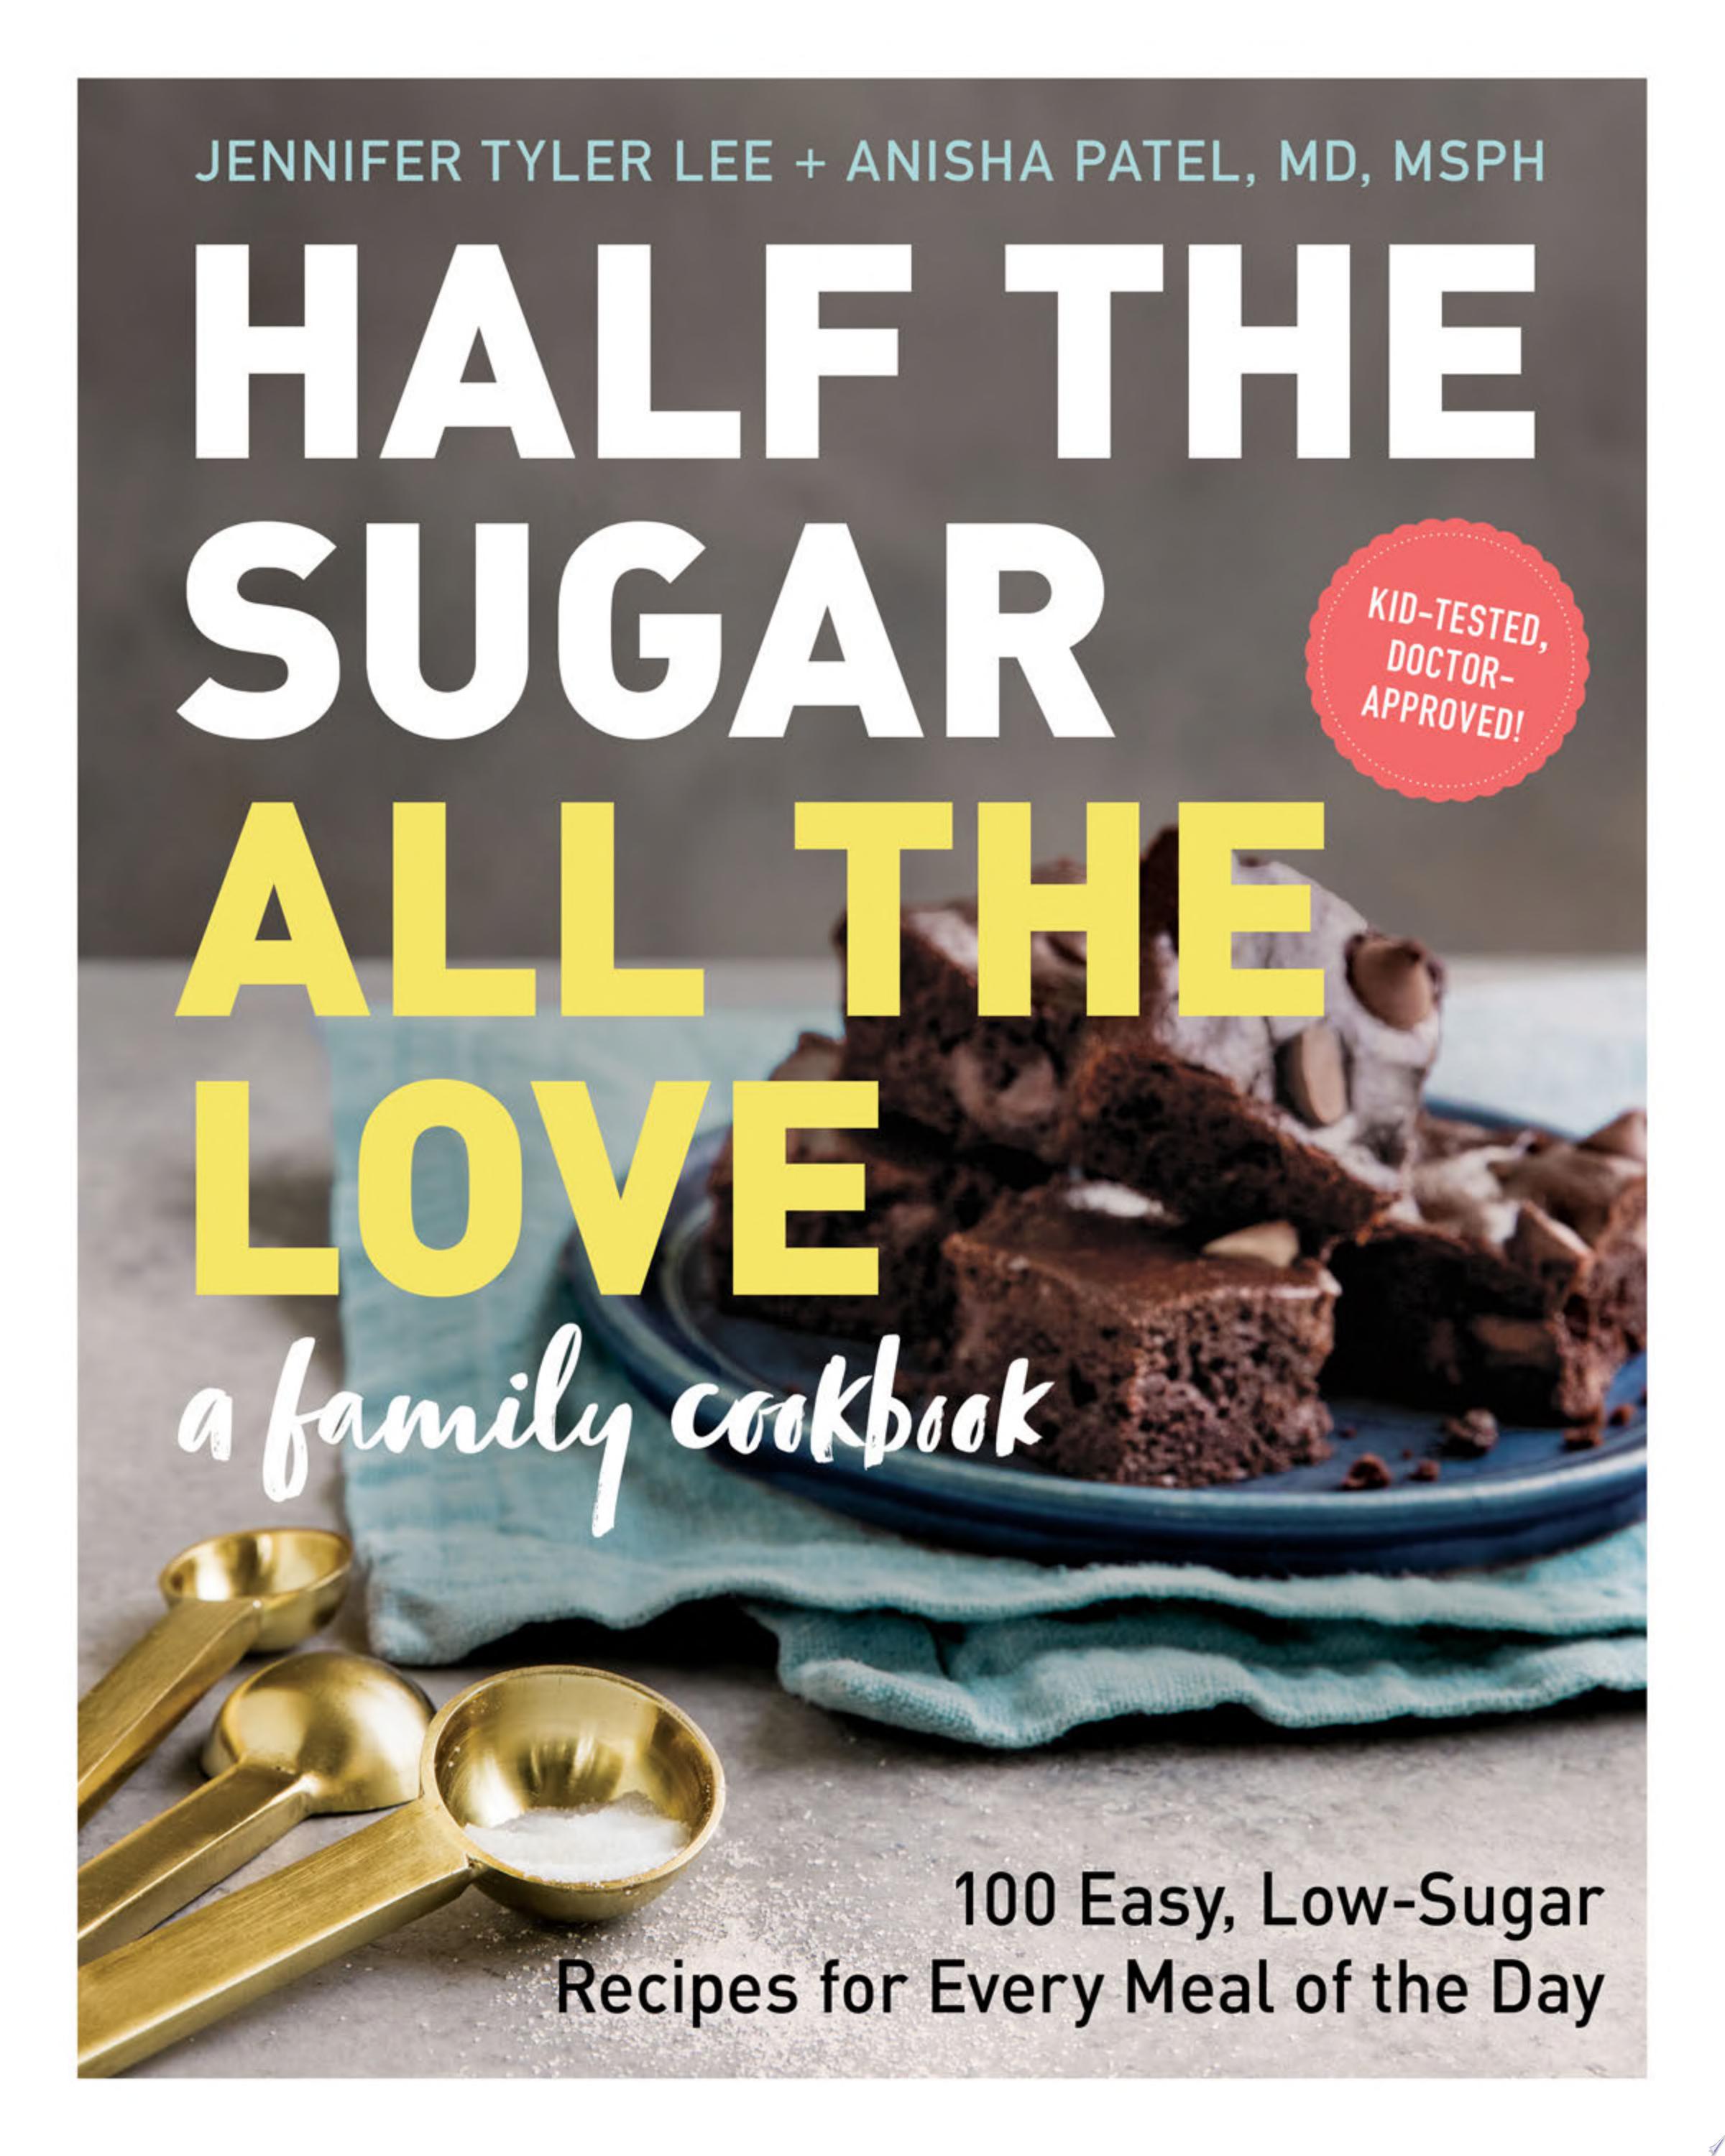 Image for "Half the Sugar, All the Love"